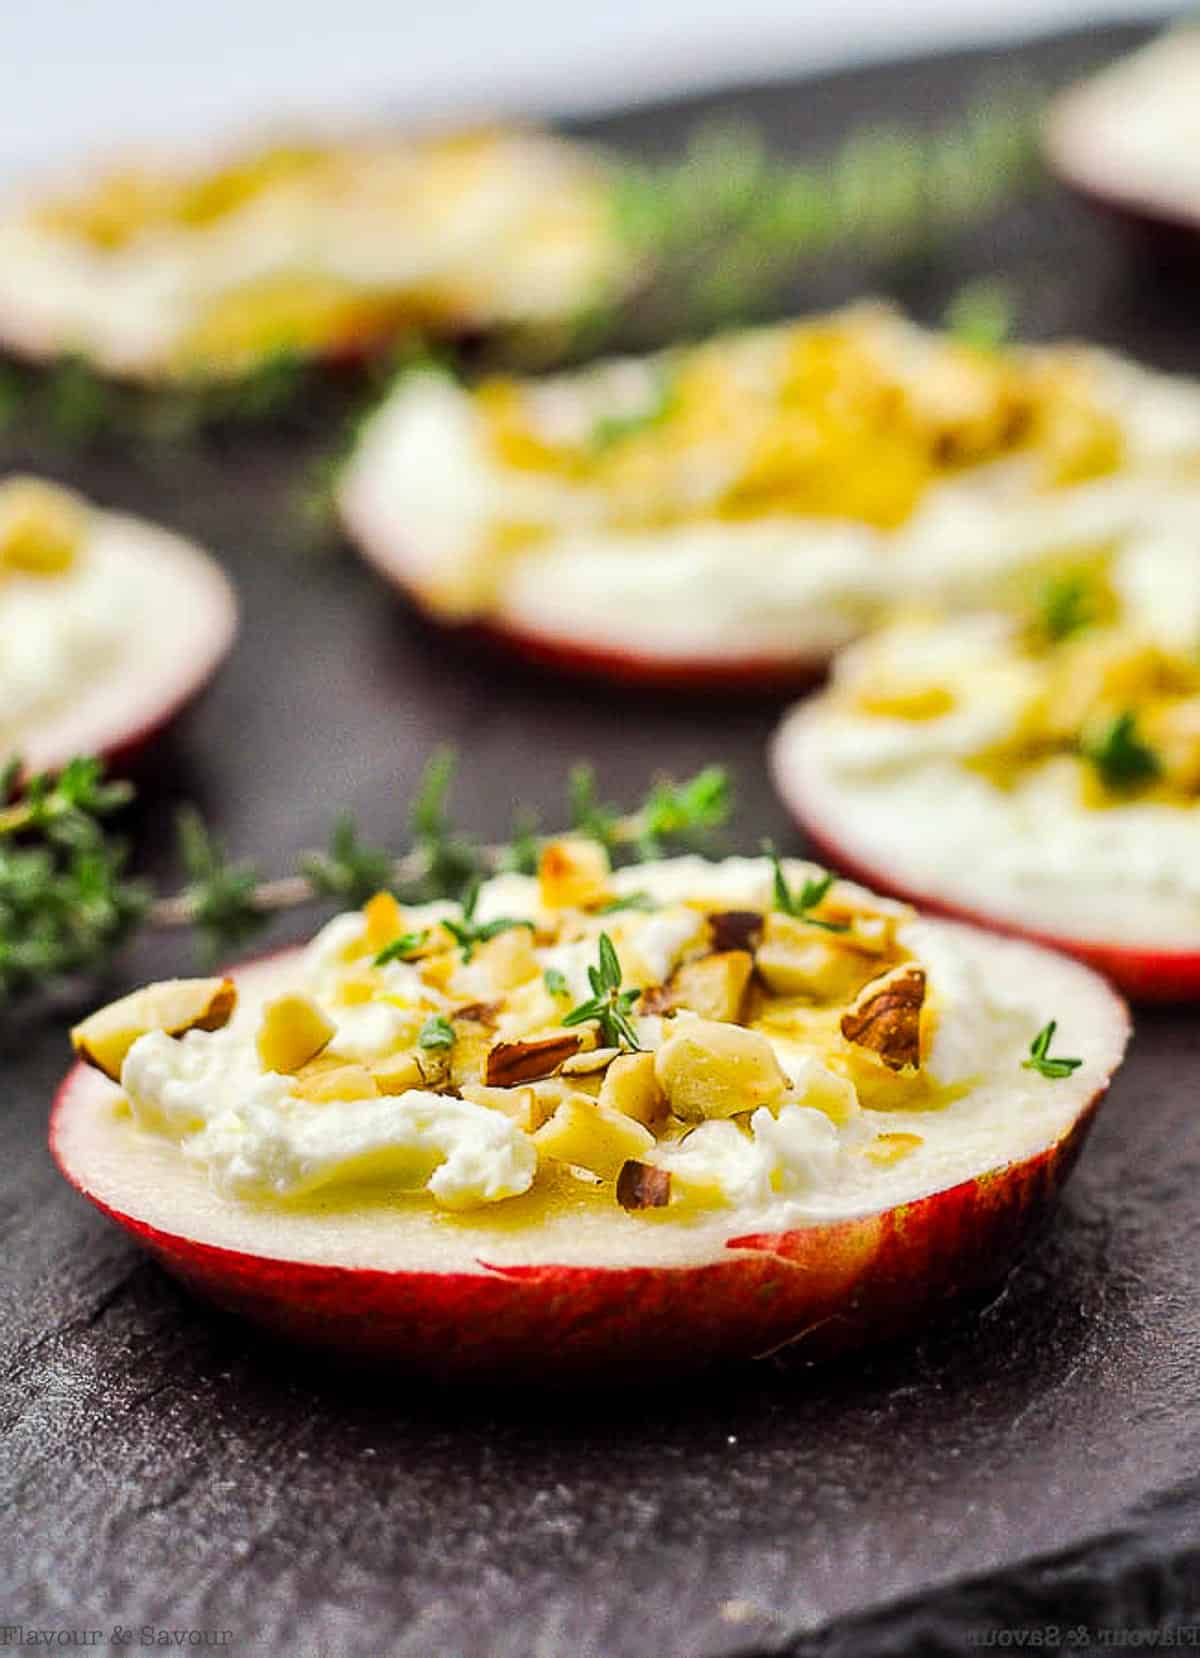 Whipped feta canapés with apple and hazelnuts.